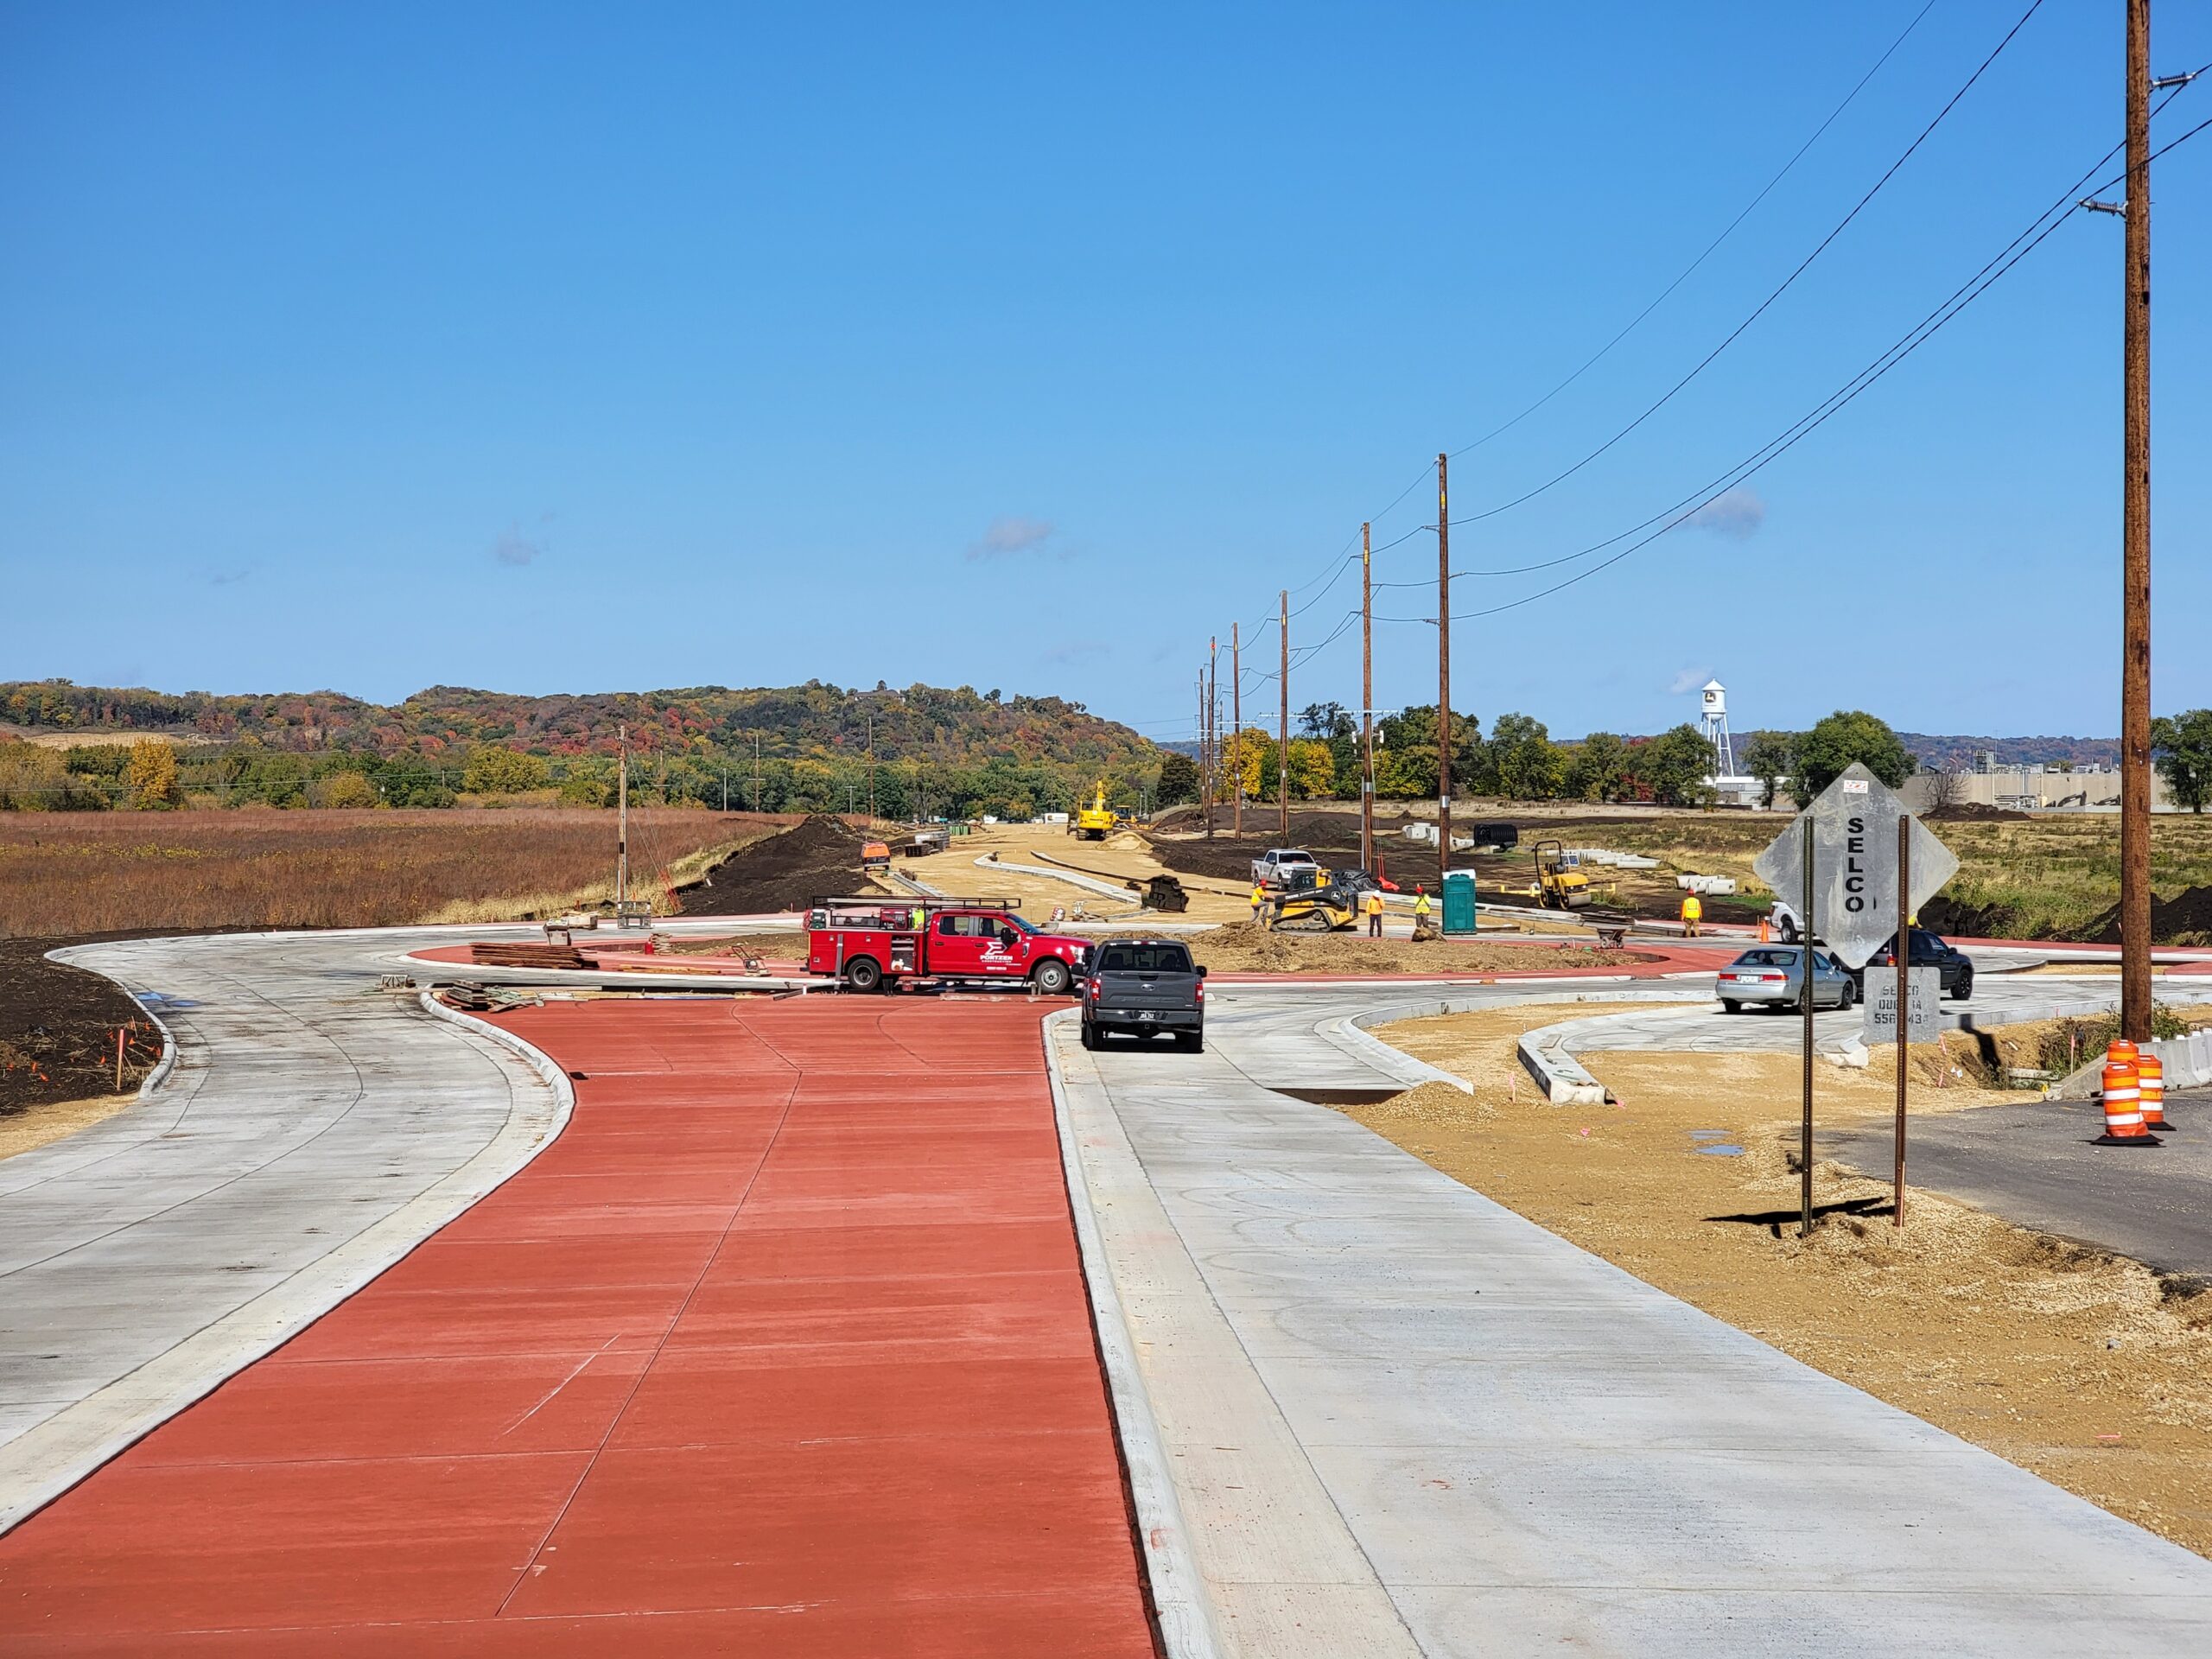 Ground level view of roundabout under construction.